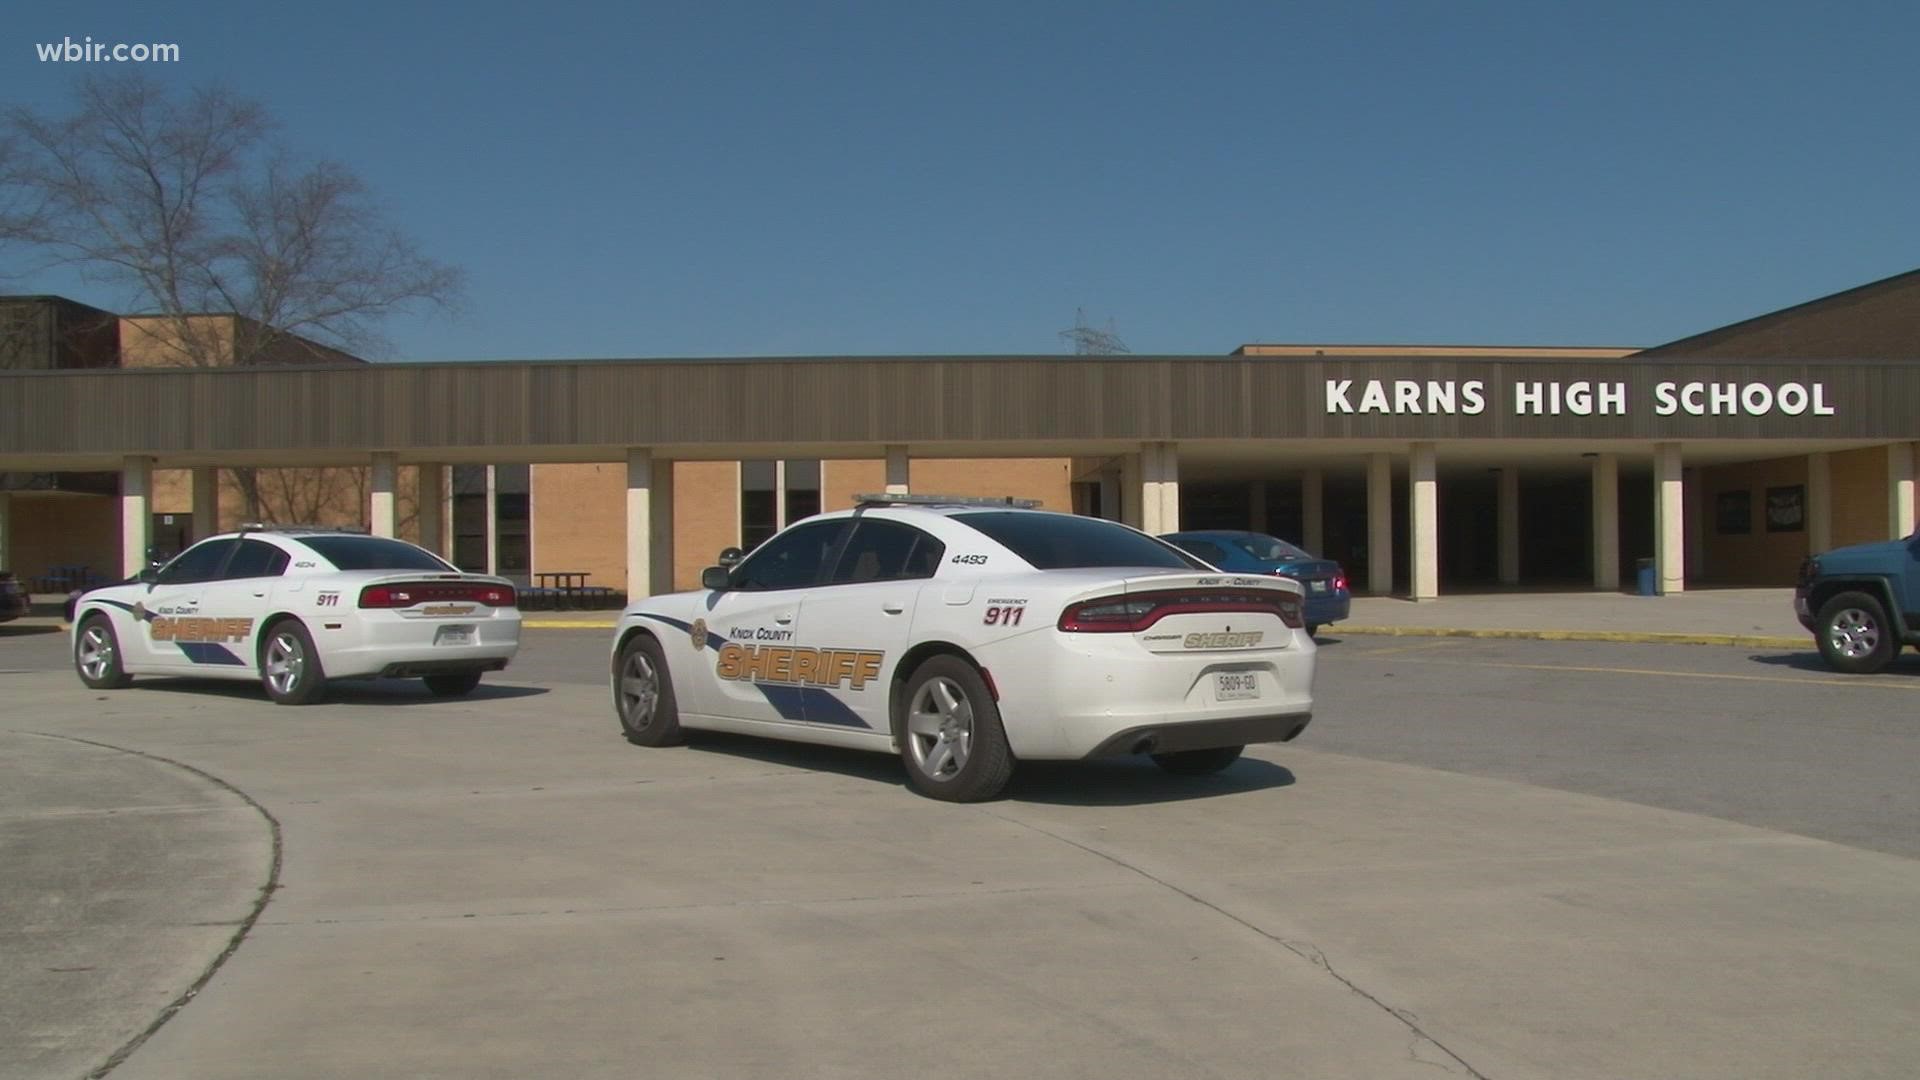 Deputies say they responded to Karns High School Friday because of a potential threat, but did not find anything to support it.